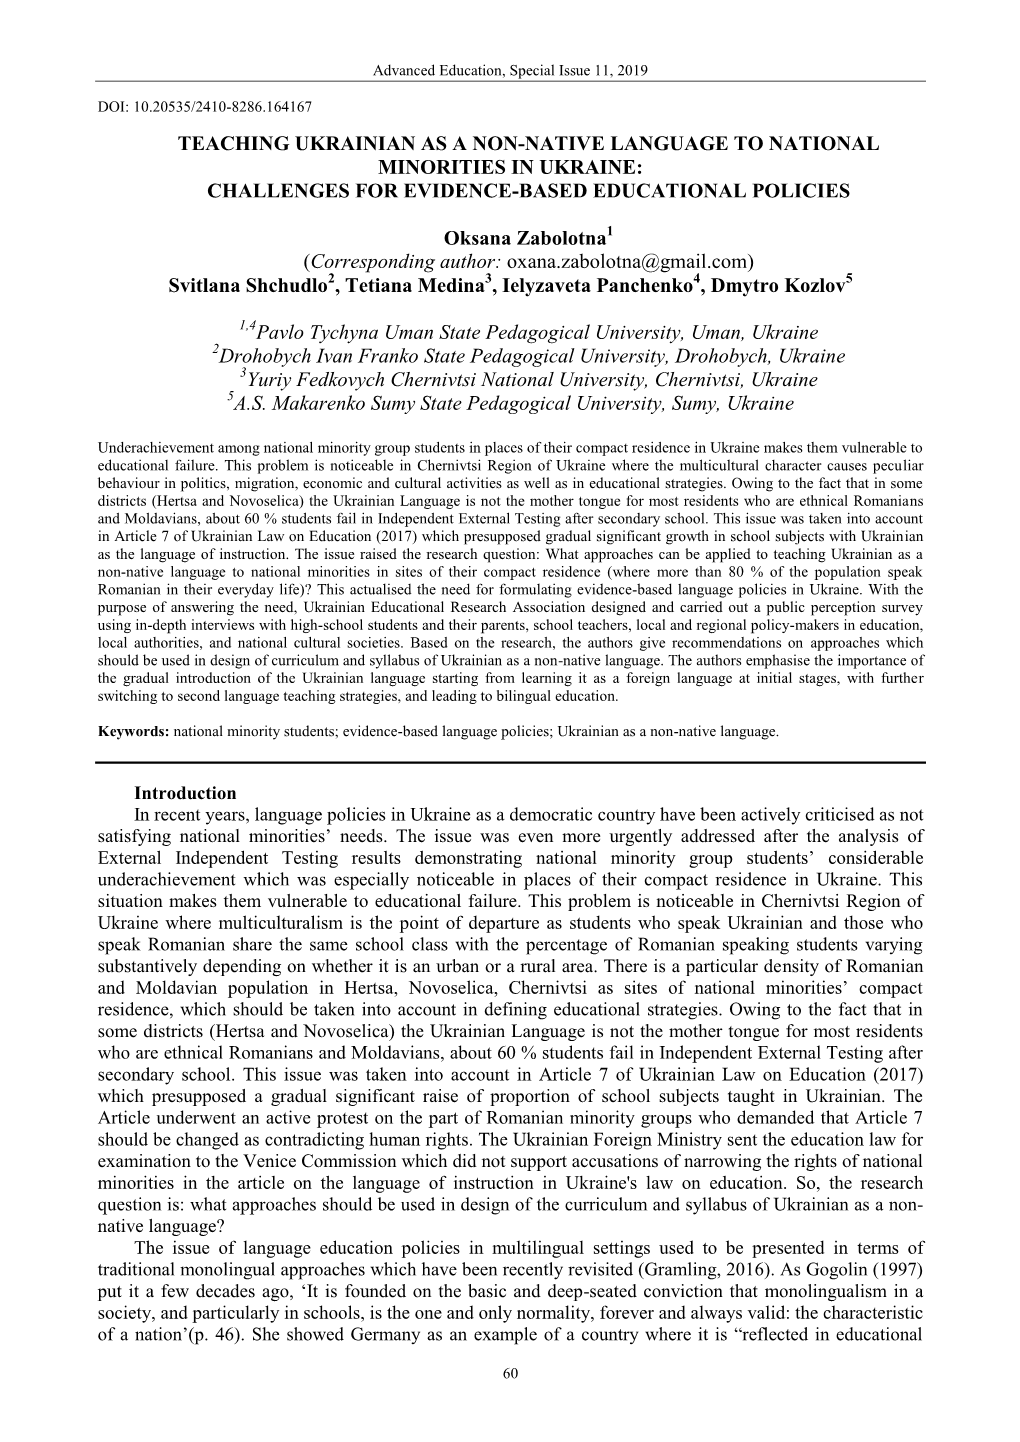 Teaching Ukrainian As a Non-Native Language to National Minorities in Ukraine: Challenges for Evidence-Based Educational Policies